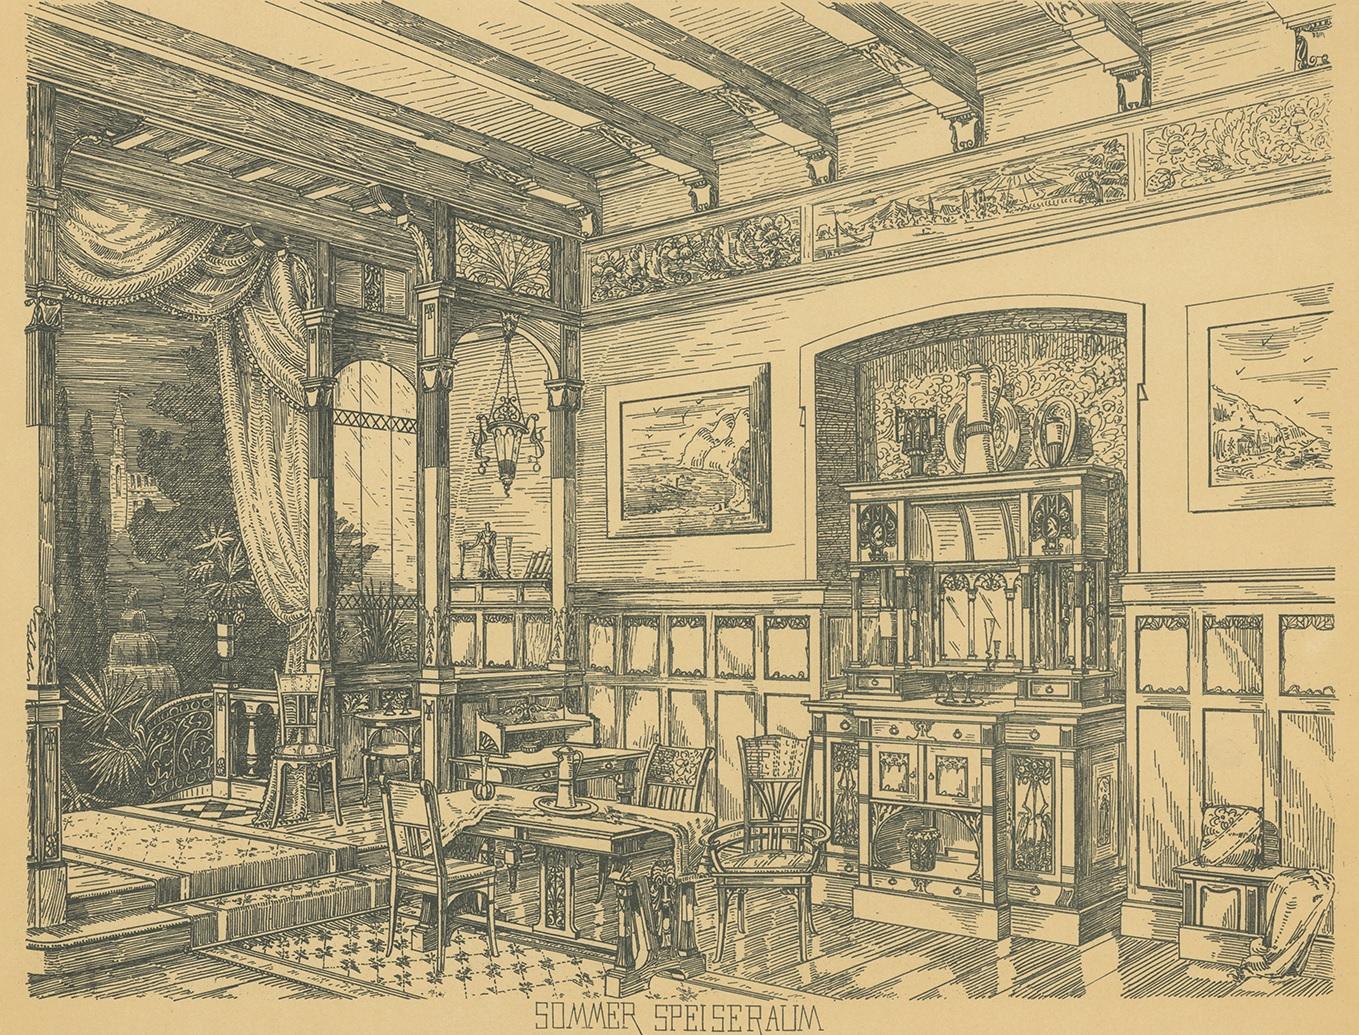 Antique print titled 'Sommer Speiseraum'. Lithograph of a summer dining room. This print originates from 'Det Moderna Hemmet' by Johannes Kramer. Published by Ferdinand Hey'l, circa 1910.